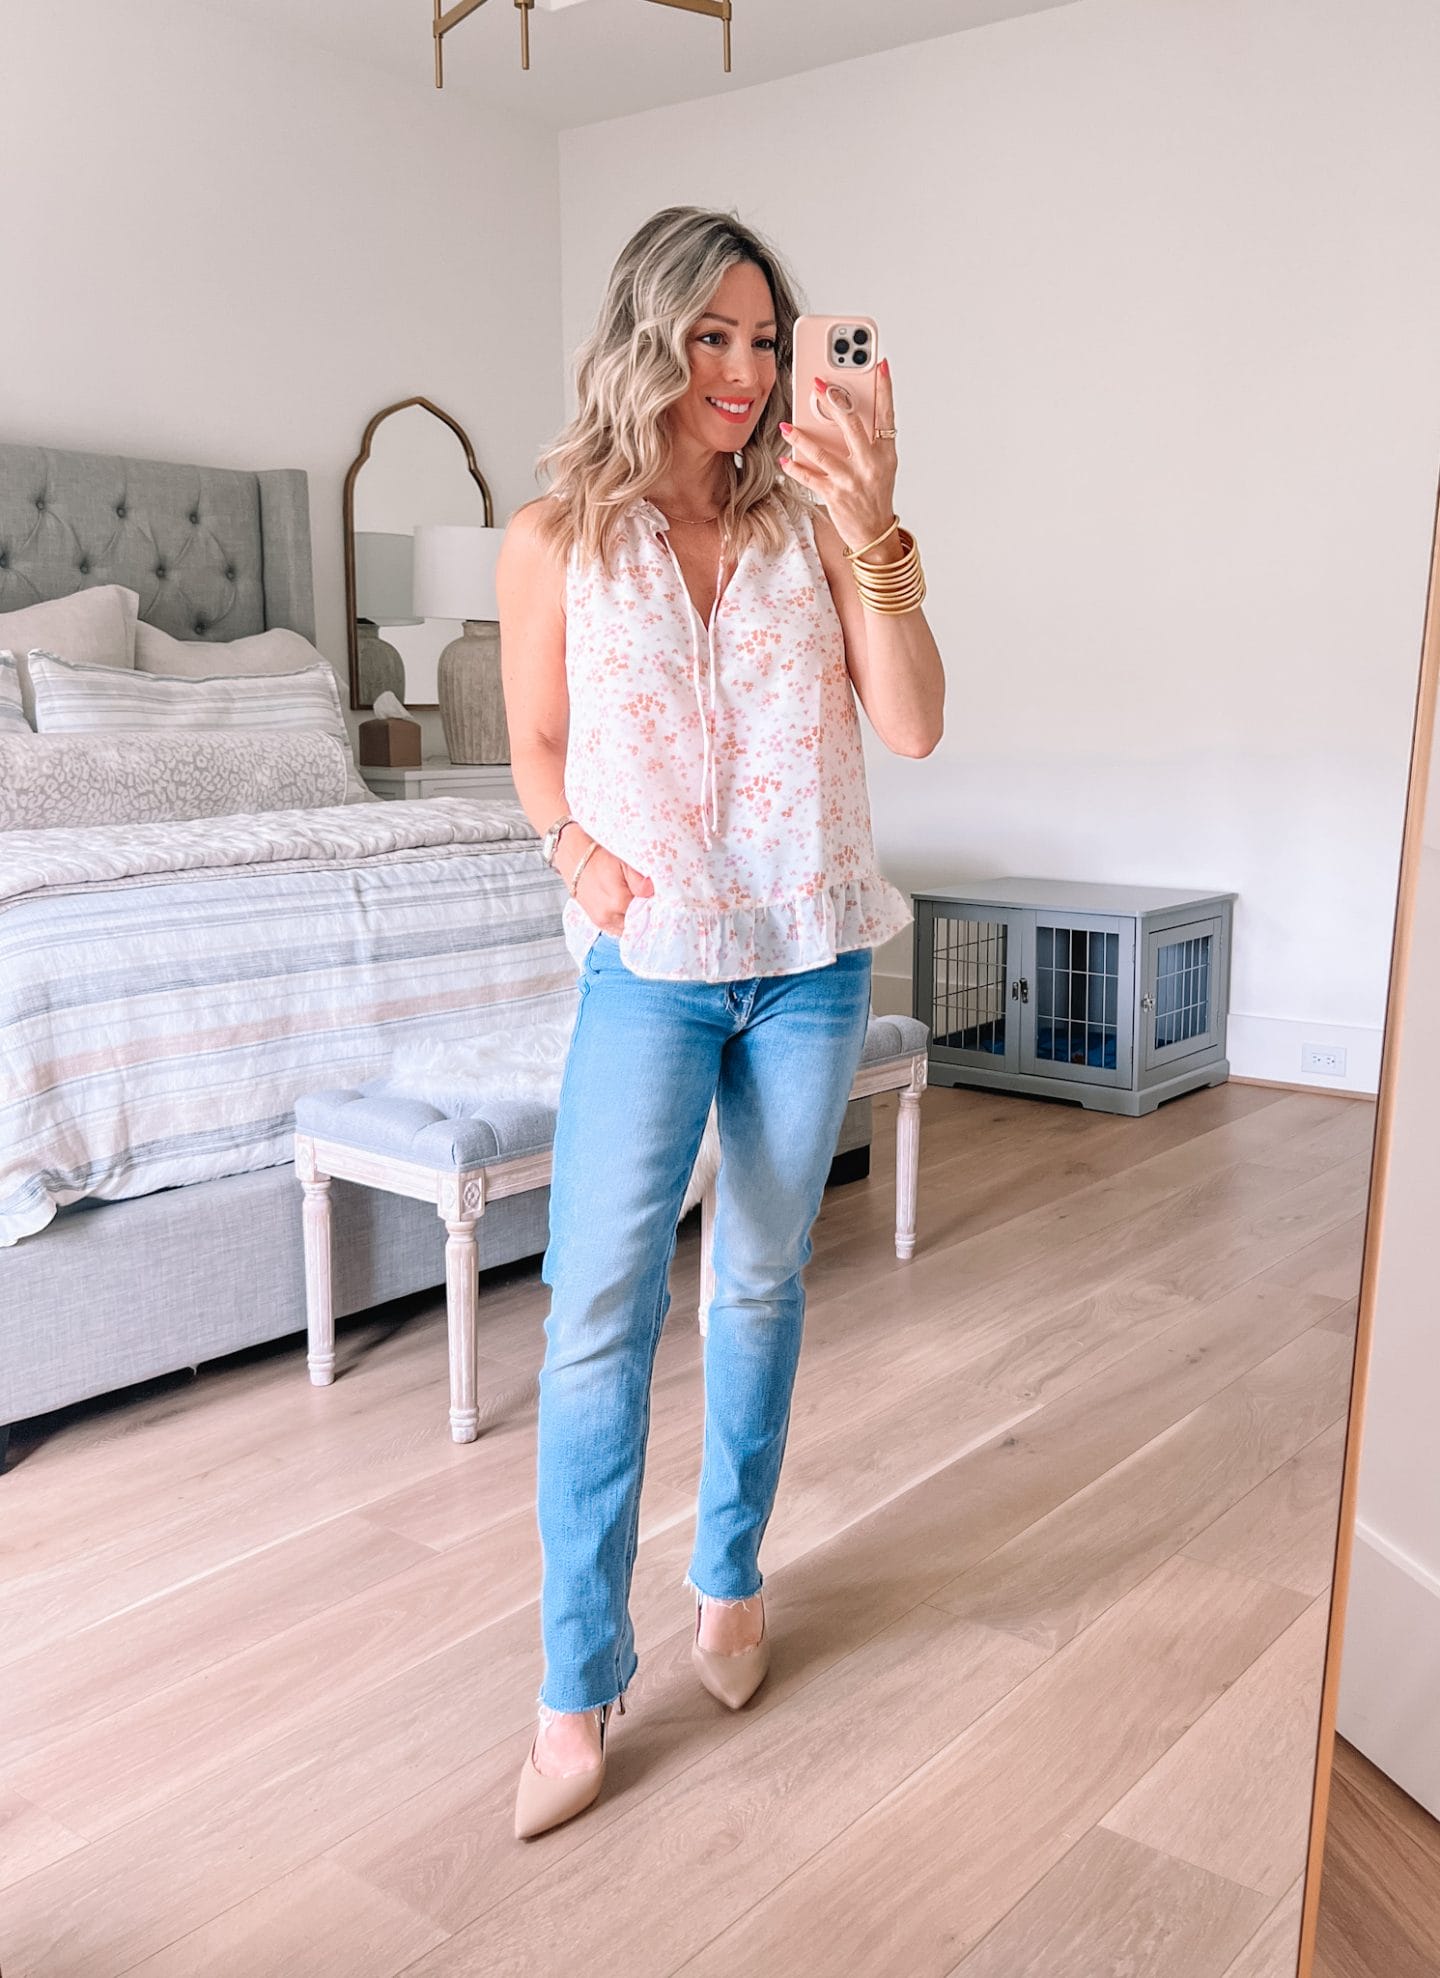 Gibson Floral Top, Mother Jeans, Heels 